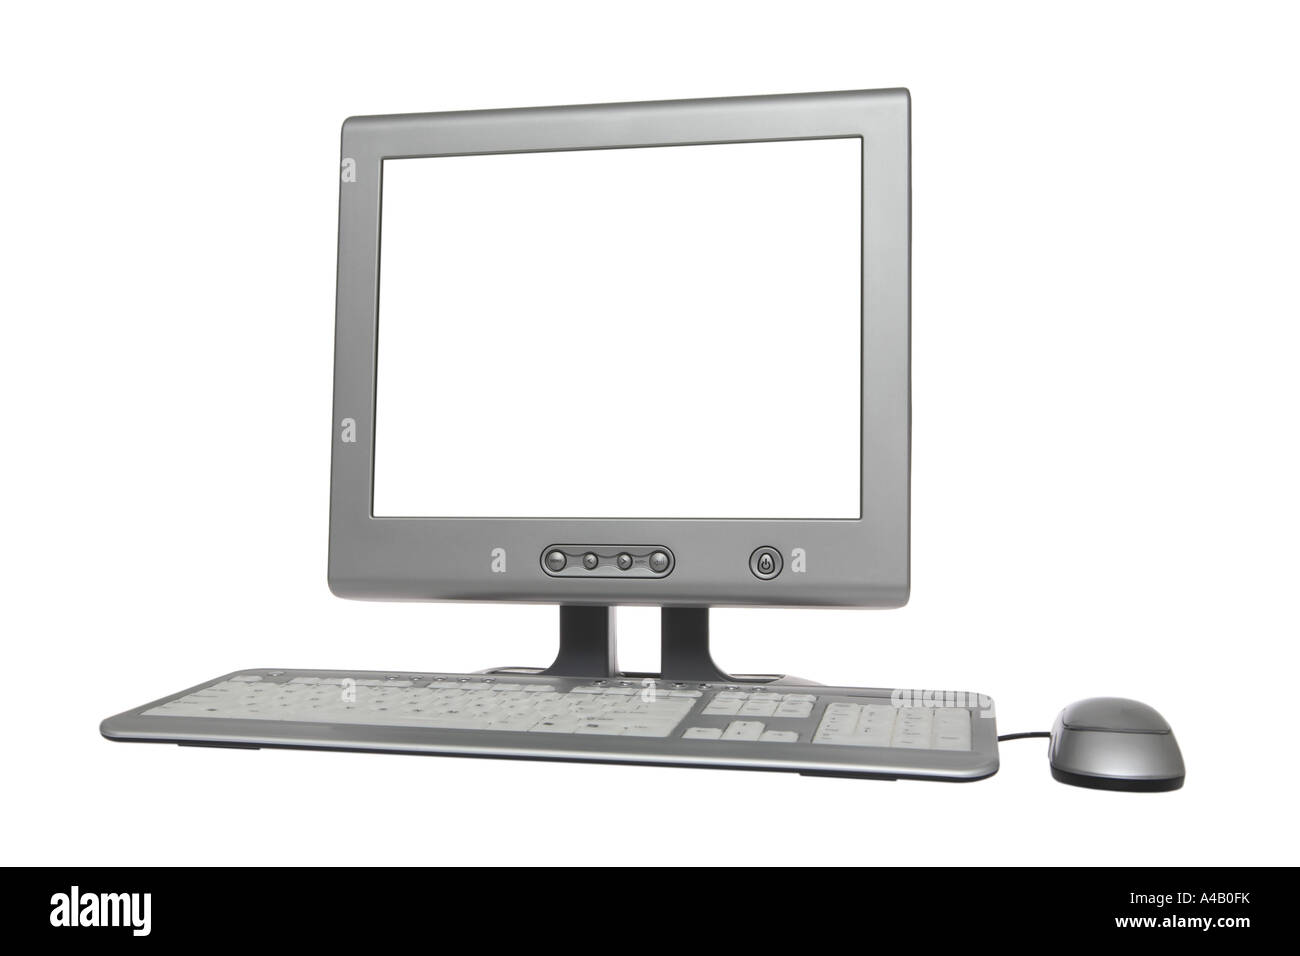 Computer with blank screen cut out on white background Stock Photo